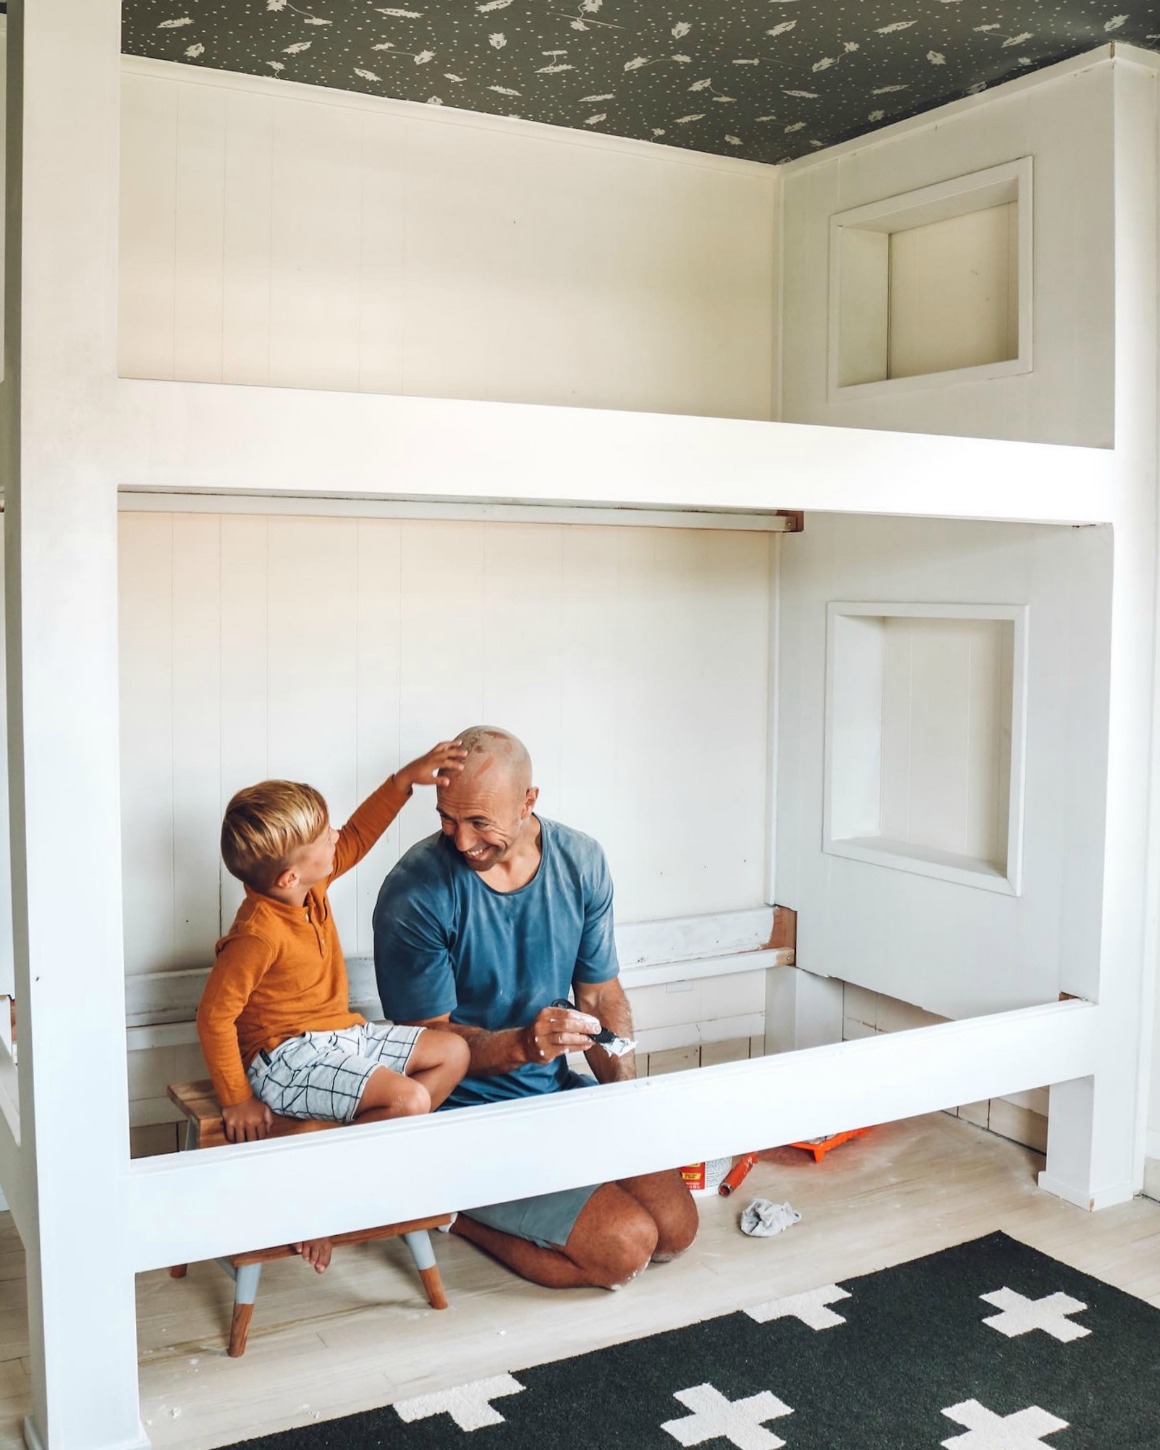 Built In Bunkbed Diy For 500 Nesting, How Much Does It Cost To Build Custom Bunk Beds